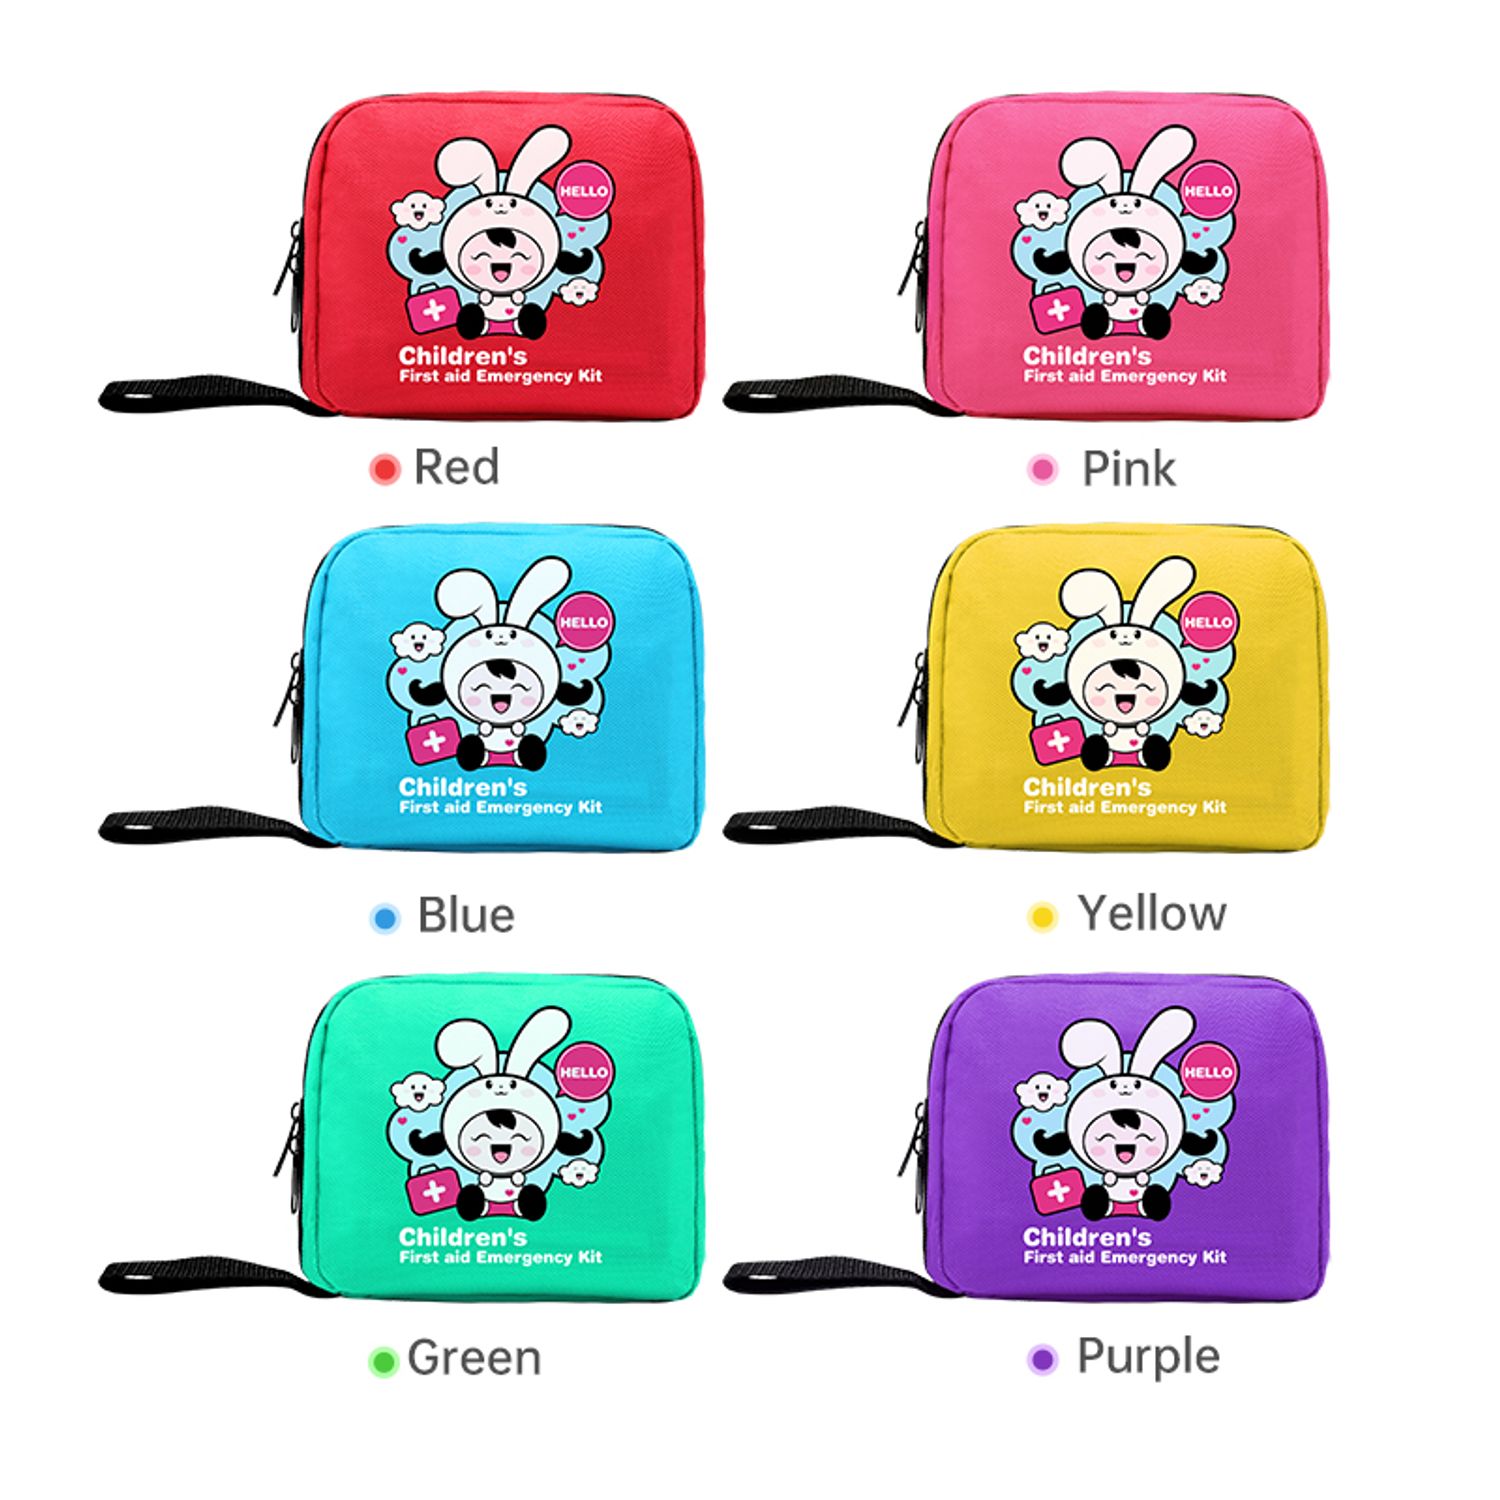 Variety of colorful children's first aid kits in red, pink, blue, yellow, green, and purple, featuring a cute bunny mascot